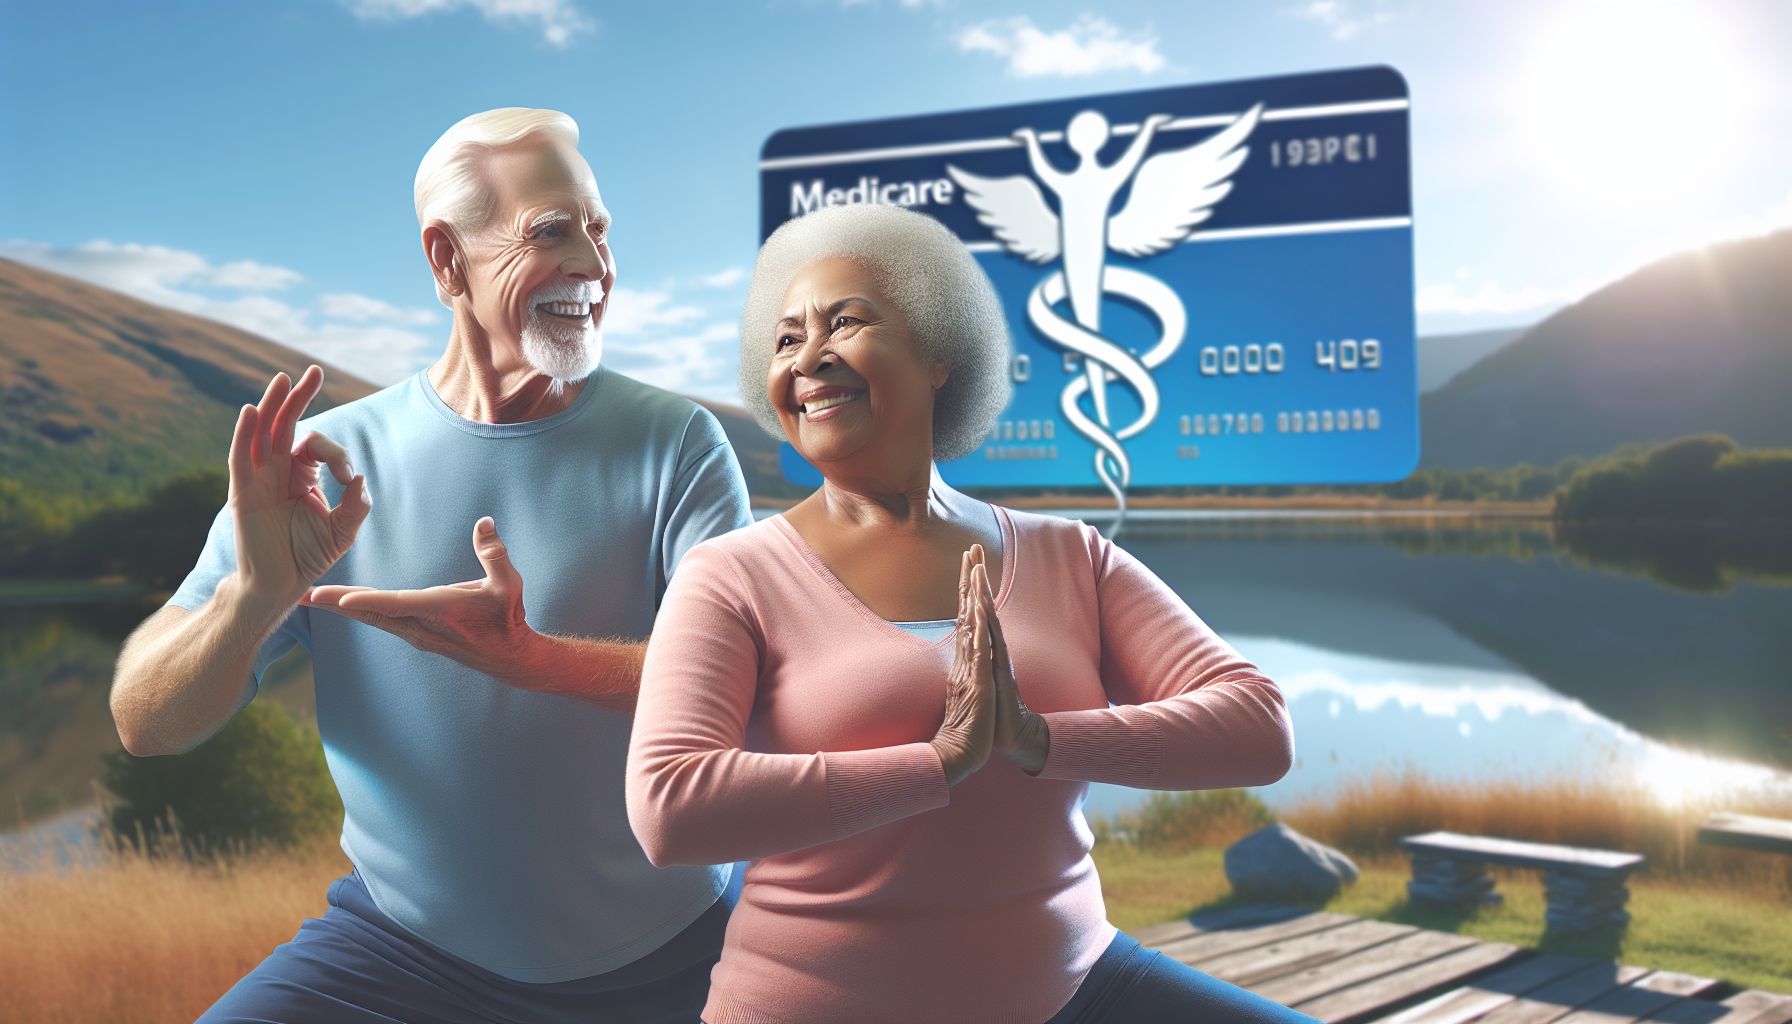 **Healthy Living for Seniors: Embrace Medicare with Vitality and Joy**